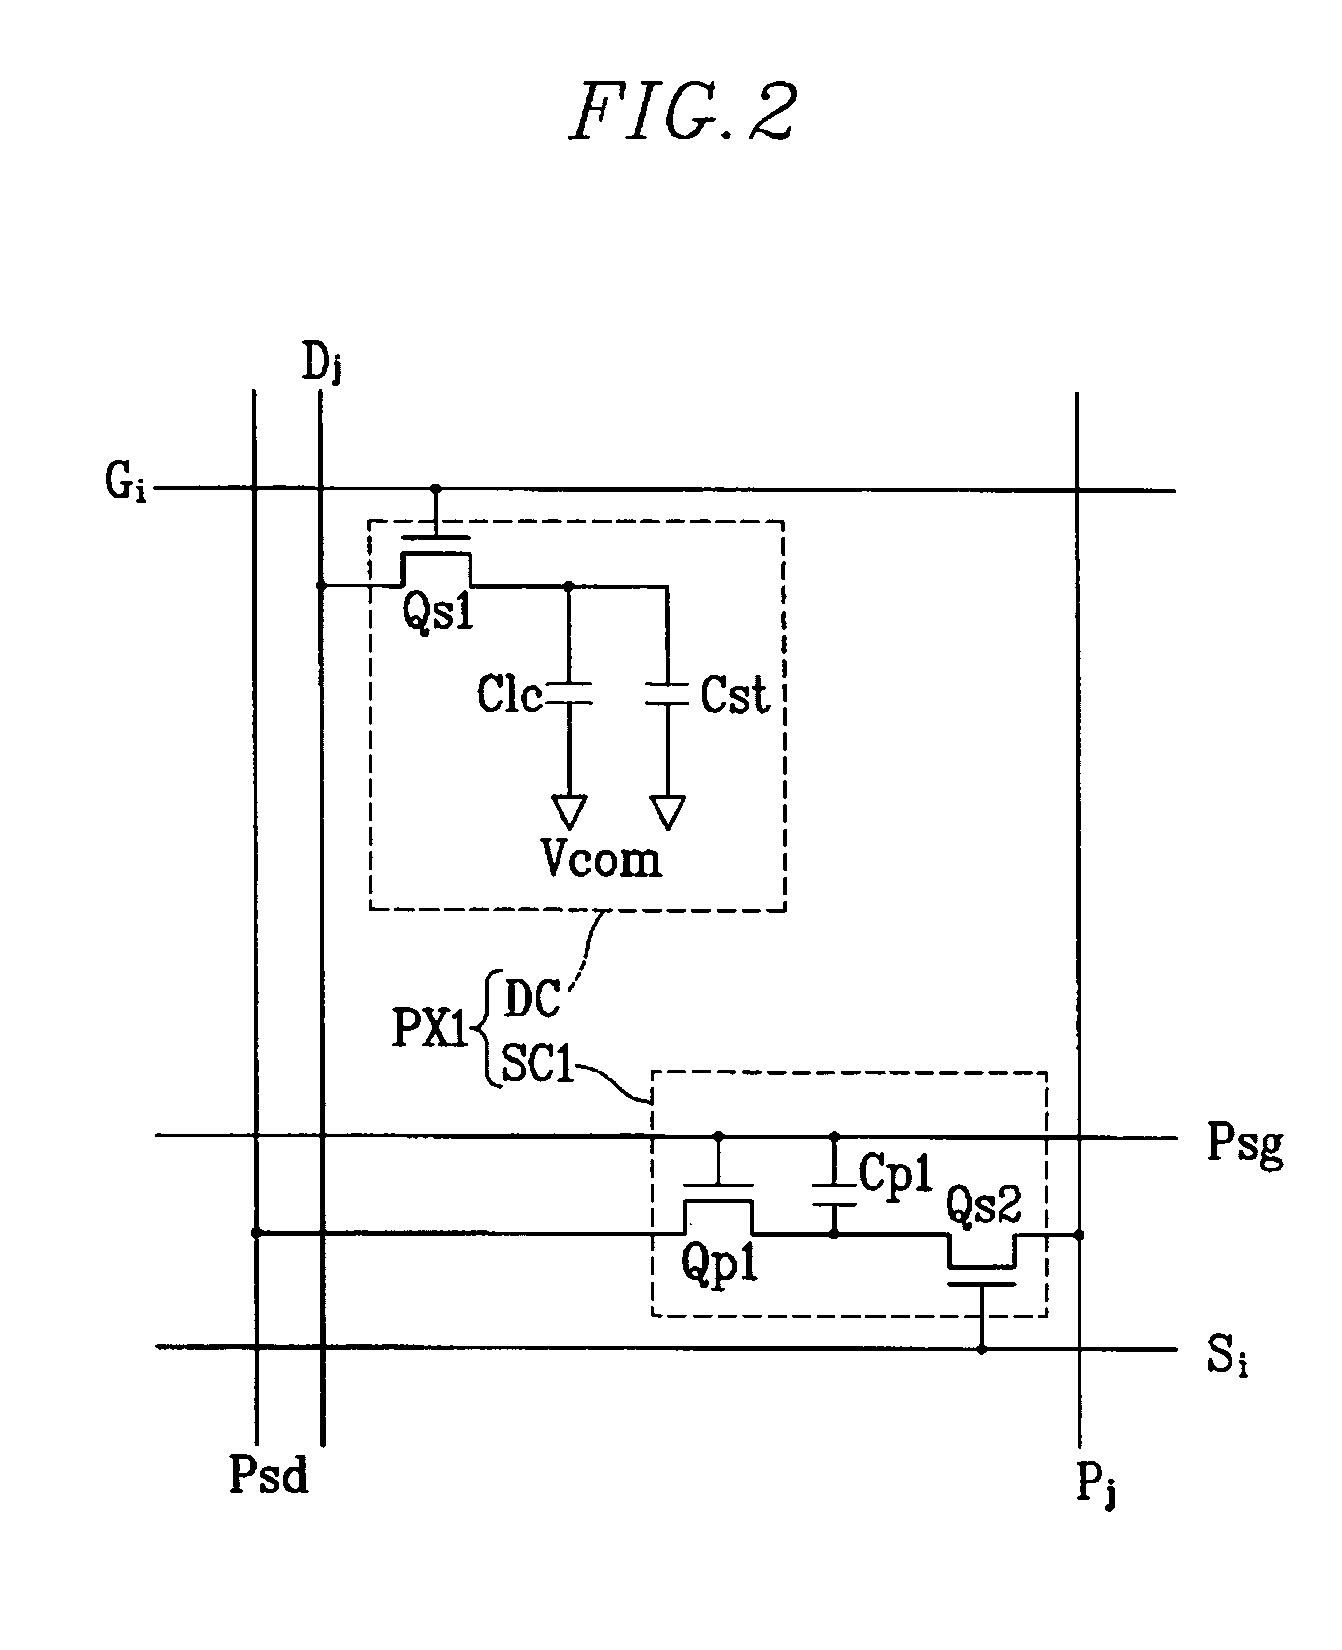 Display device and driving apparatus including a photo sensing circuit and a pressure sensing circuit and method thereof